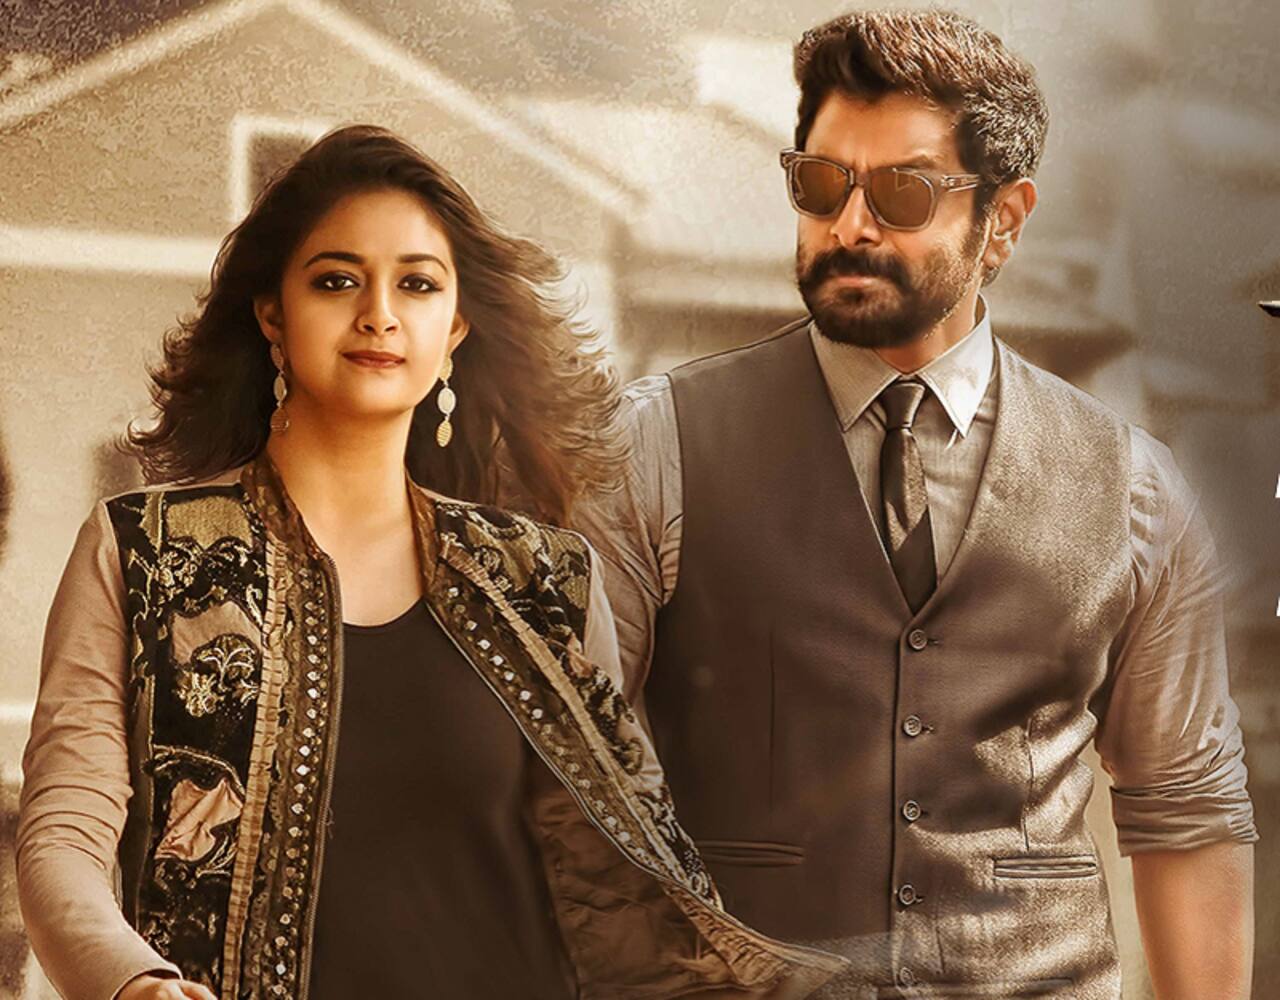 Saamy Telugu trailer: Chiyaan Vikram and Keerthi Suresh's crackling chemistry stands out in this high voltage actioner